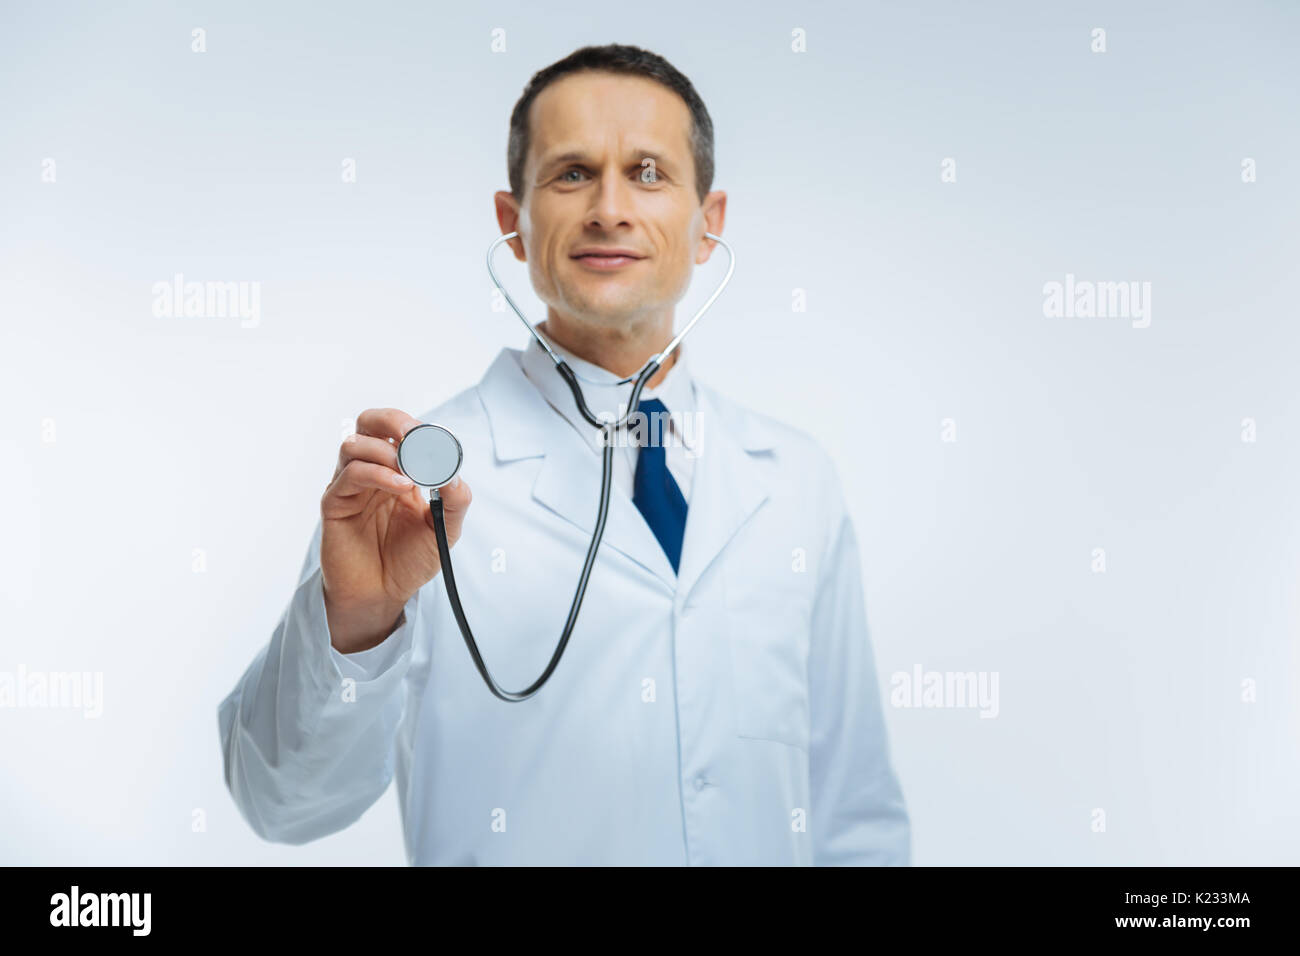 Friendly looking doctor listening to heart with stethoscope Stock Photo